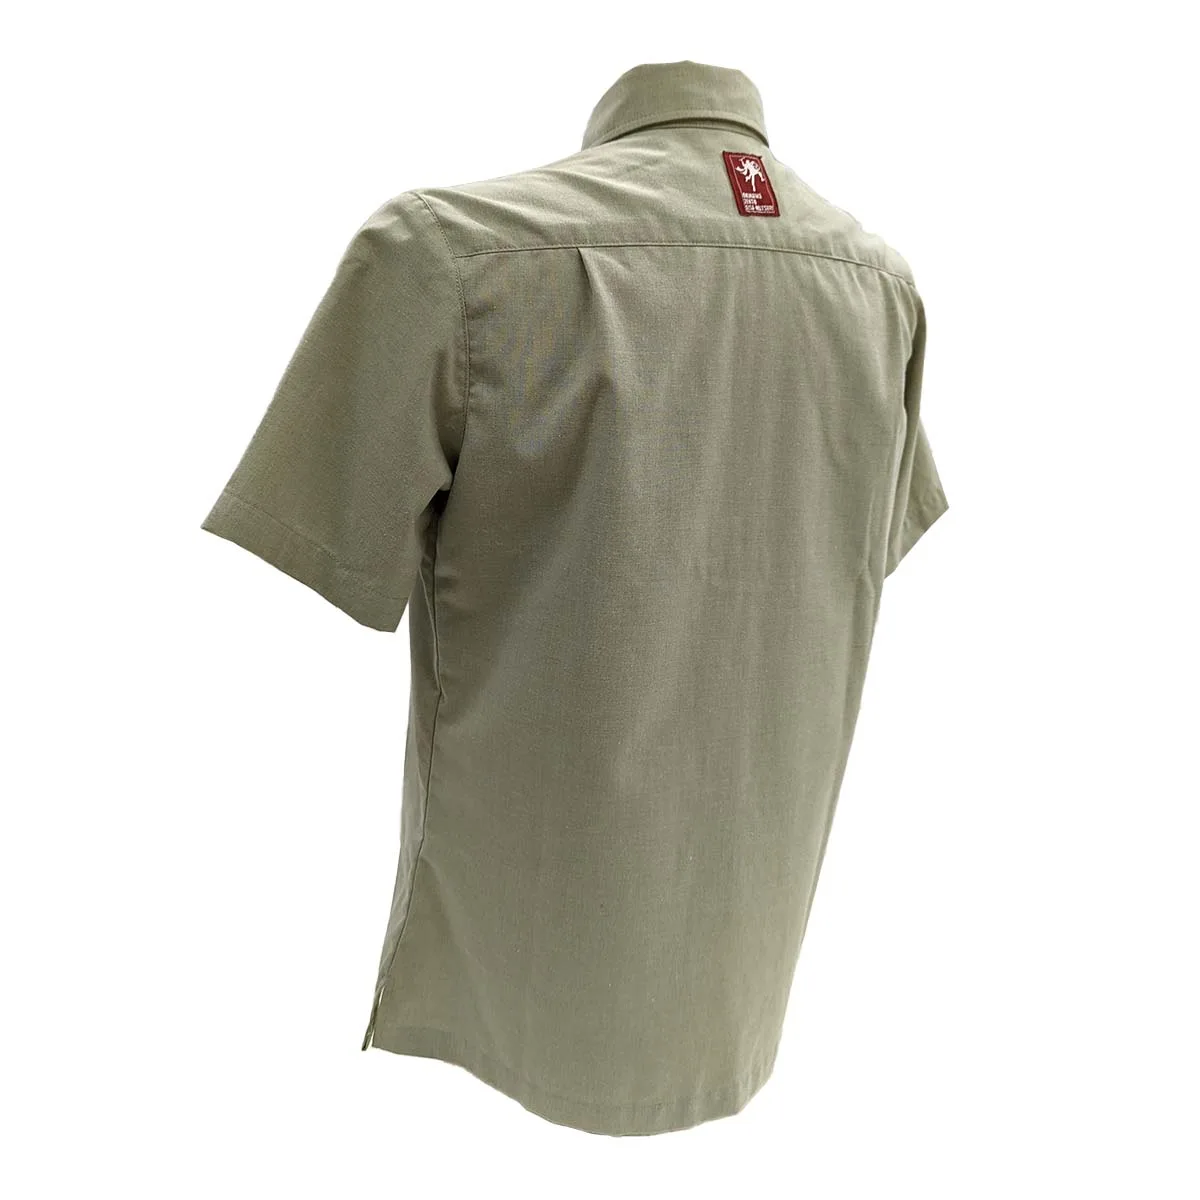 [Okinawa All-Island Eisa Festival] 2021 Eisa Insect Repelling Shirt (Womens)